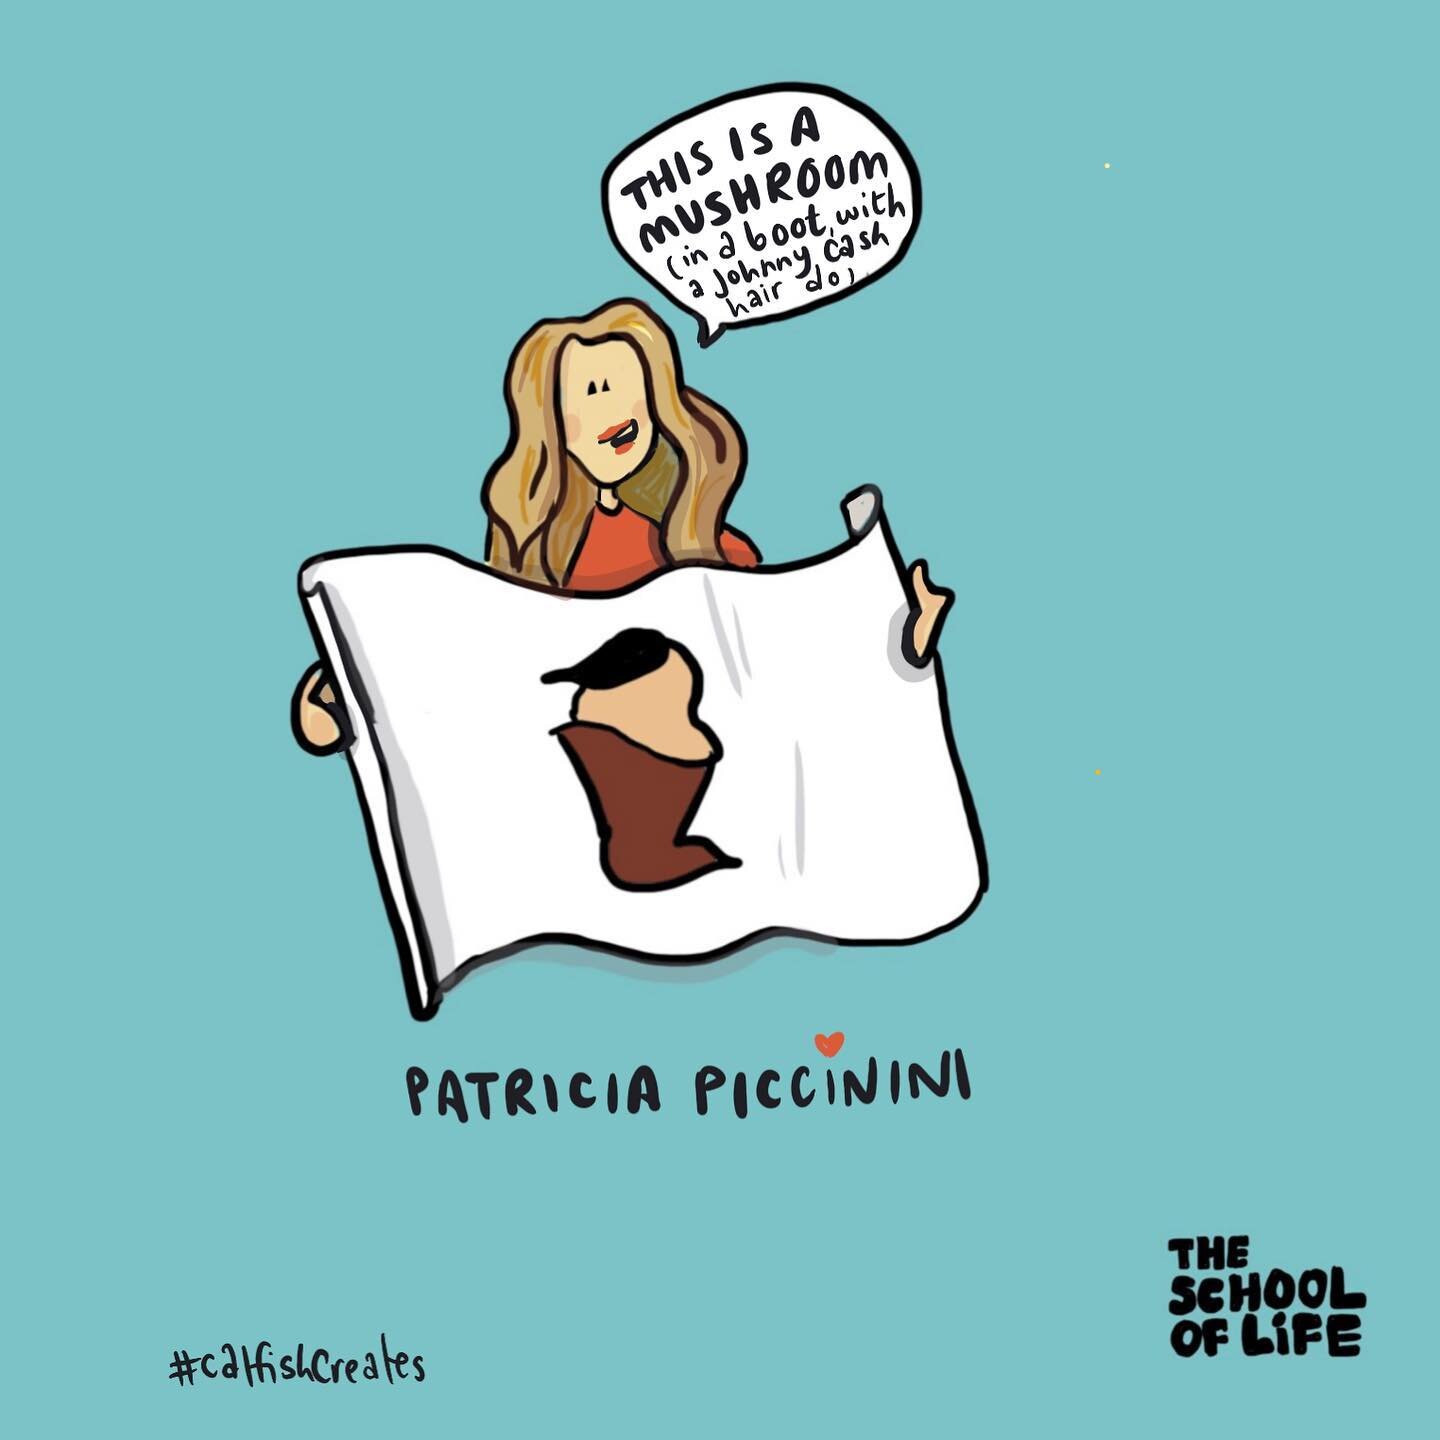 When you&rsquo;re looking through 👀 your library of sketches and find the most random little anecdotes! #catfishcreates @patricia.piccinini 2018 talk at @school____of____life